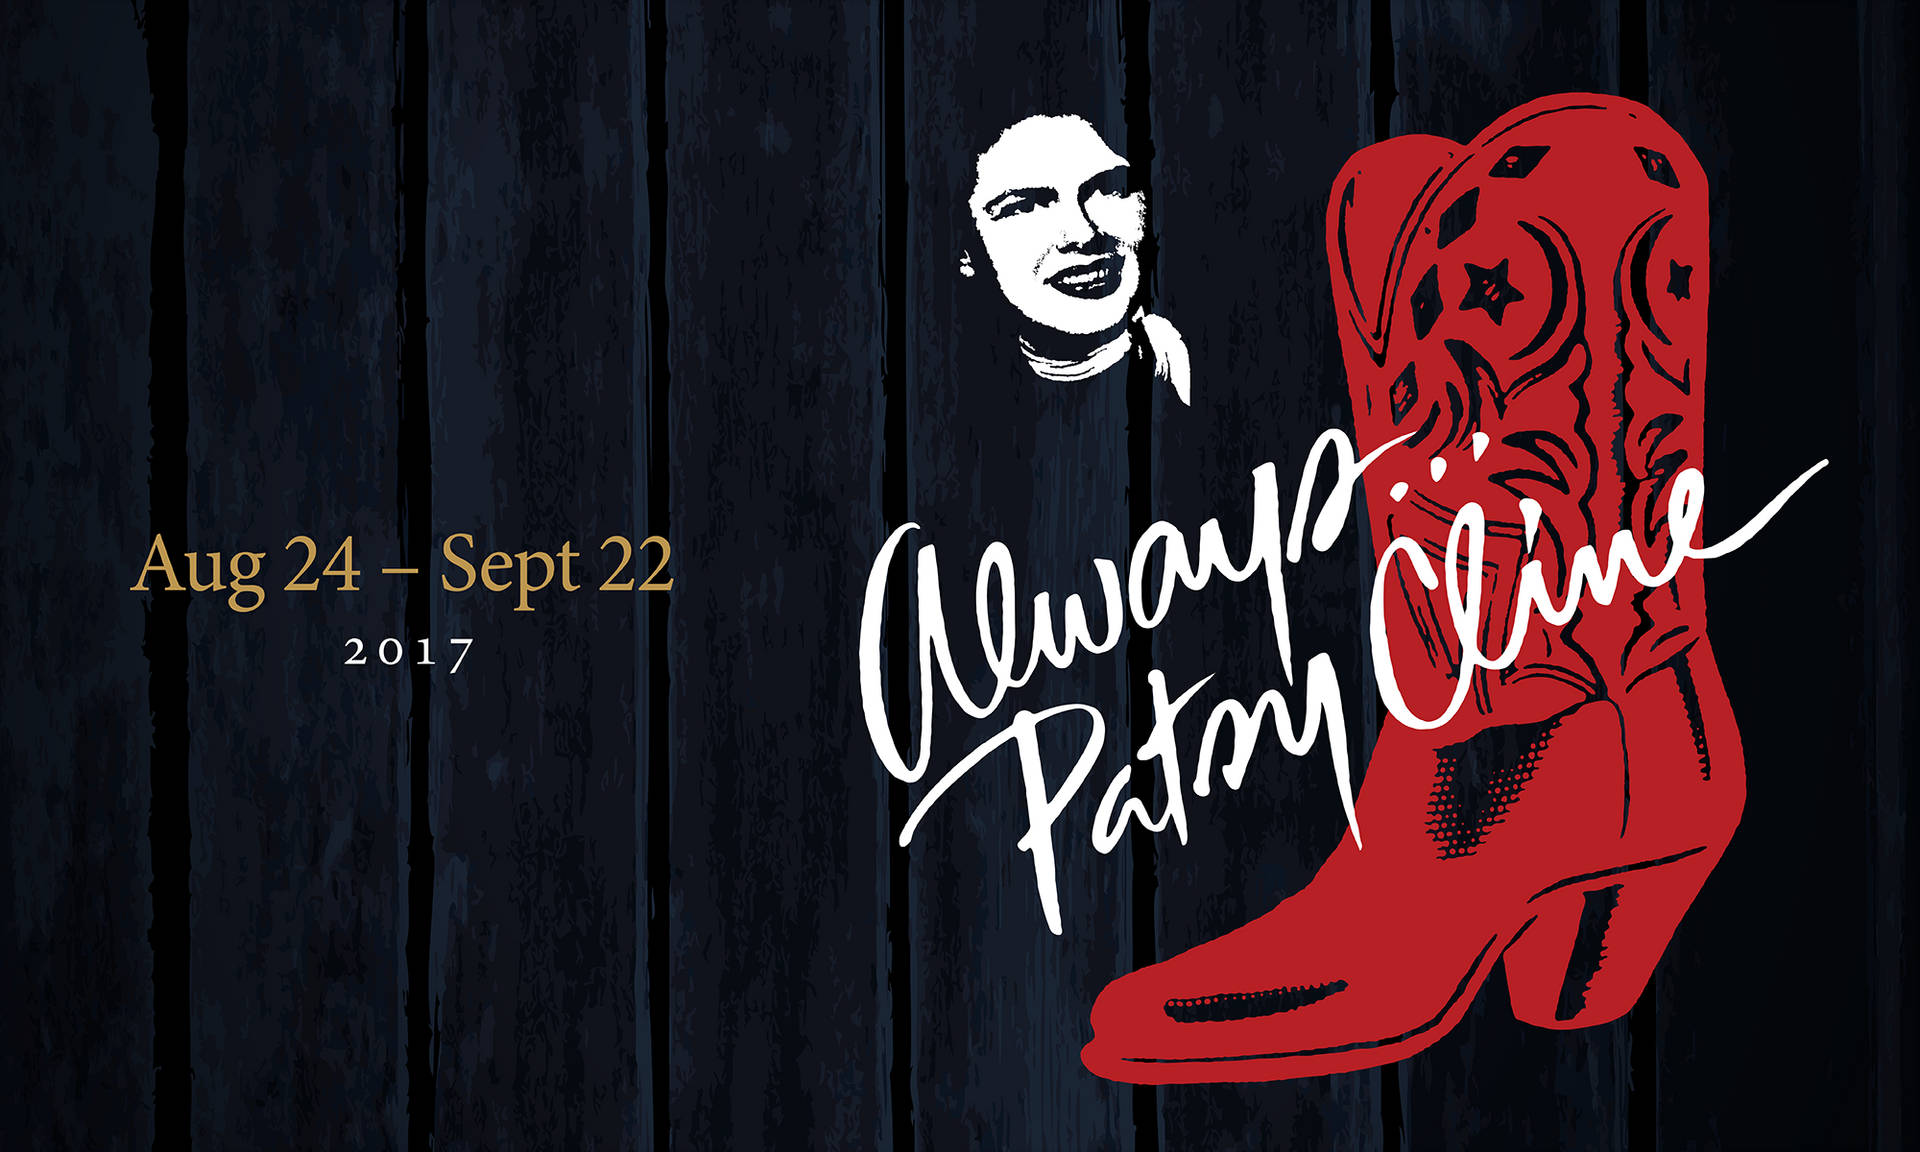 Always Patsy Cline Grand Theatre Wallpaper